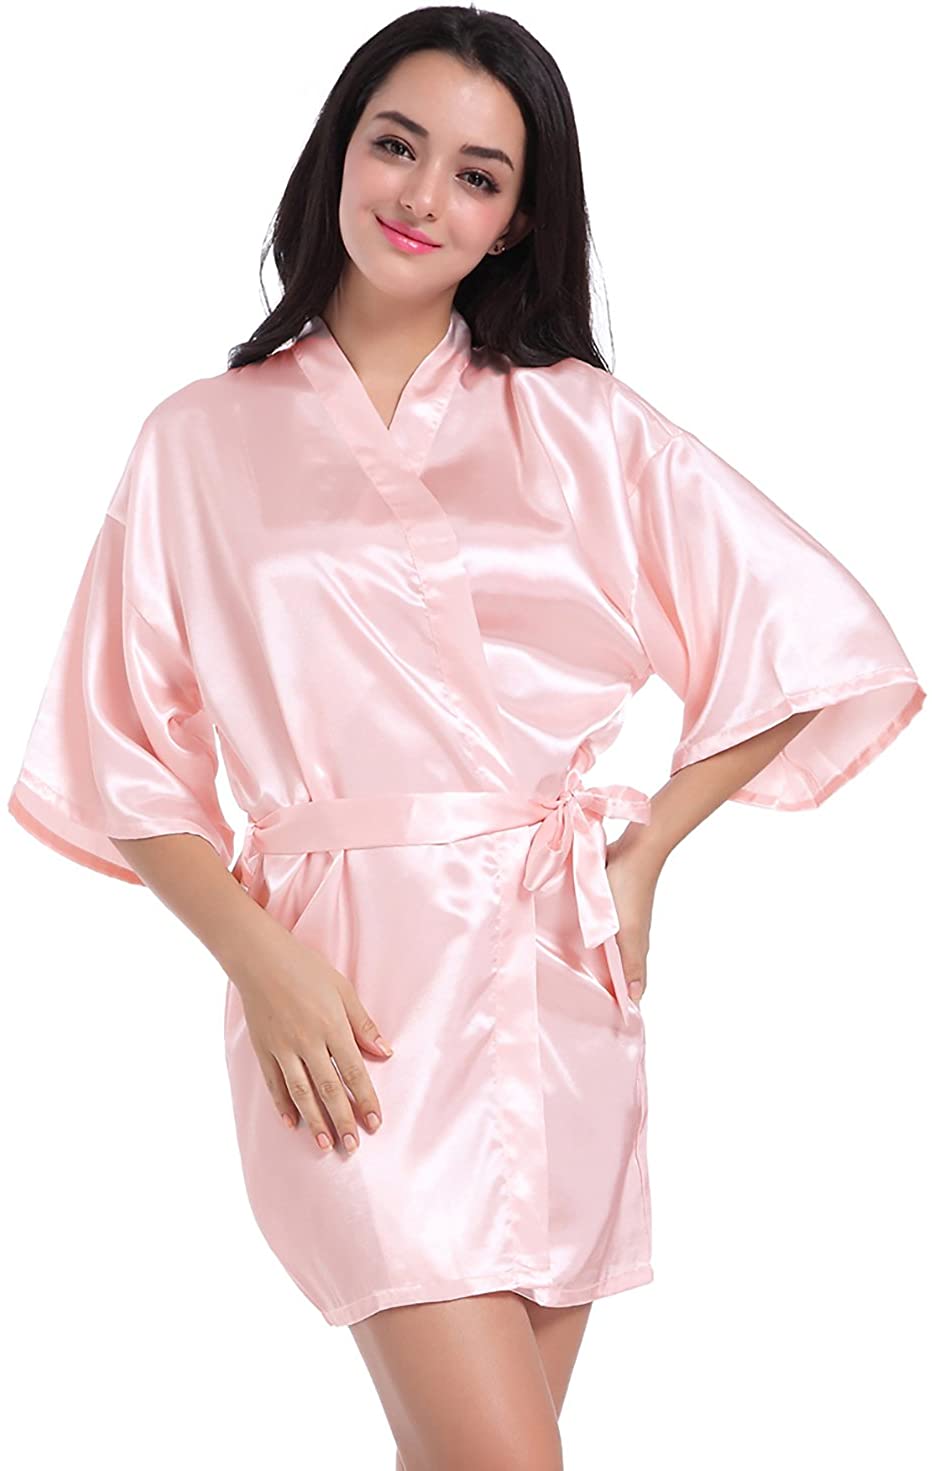 Price:$12.50 Admireme Women's Kimono Robes Satin Nightdress Pure Colour Short Style with Oblique V-Neck Pink at Amazon Women’s Clothing store